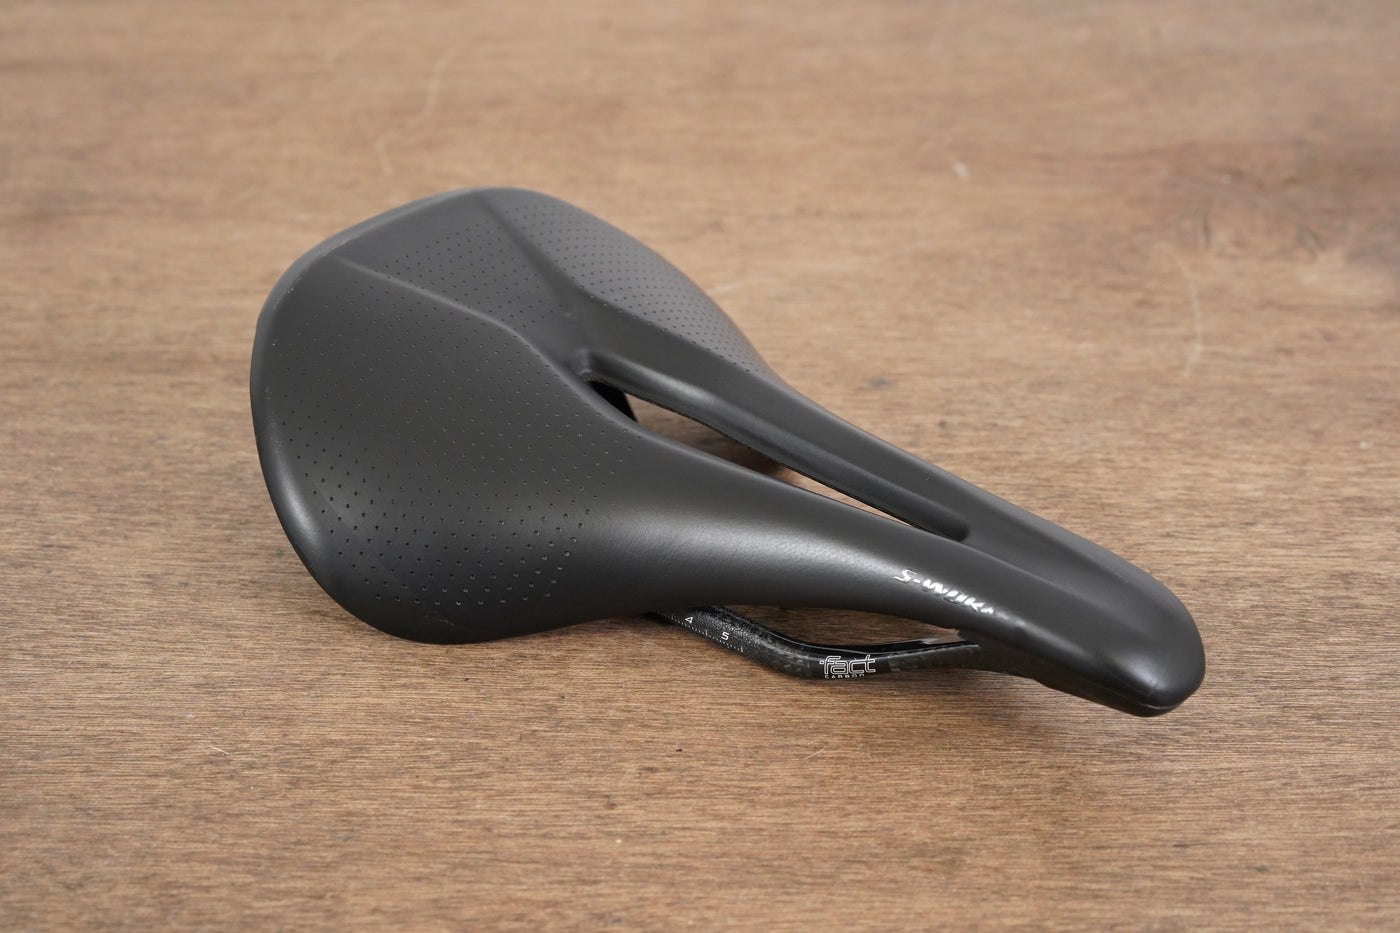 155mm Specialized S-WORKS Power Carbon Road Saddle 143g